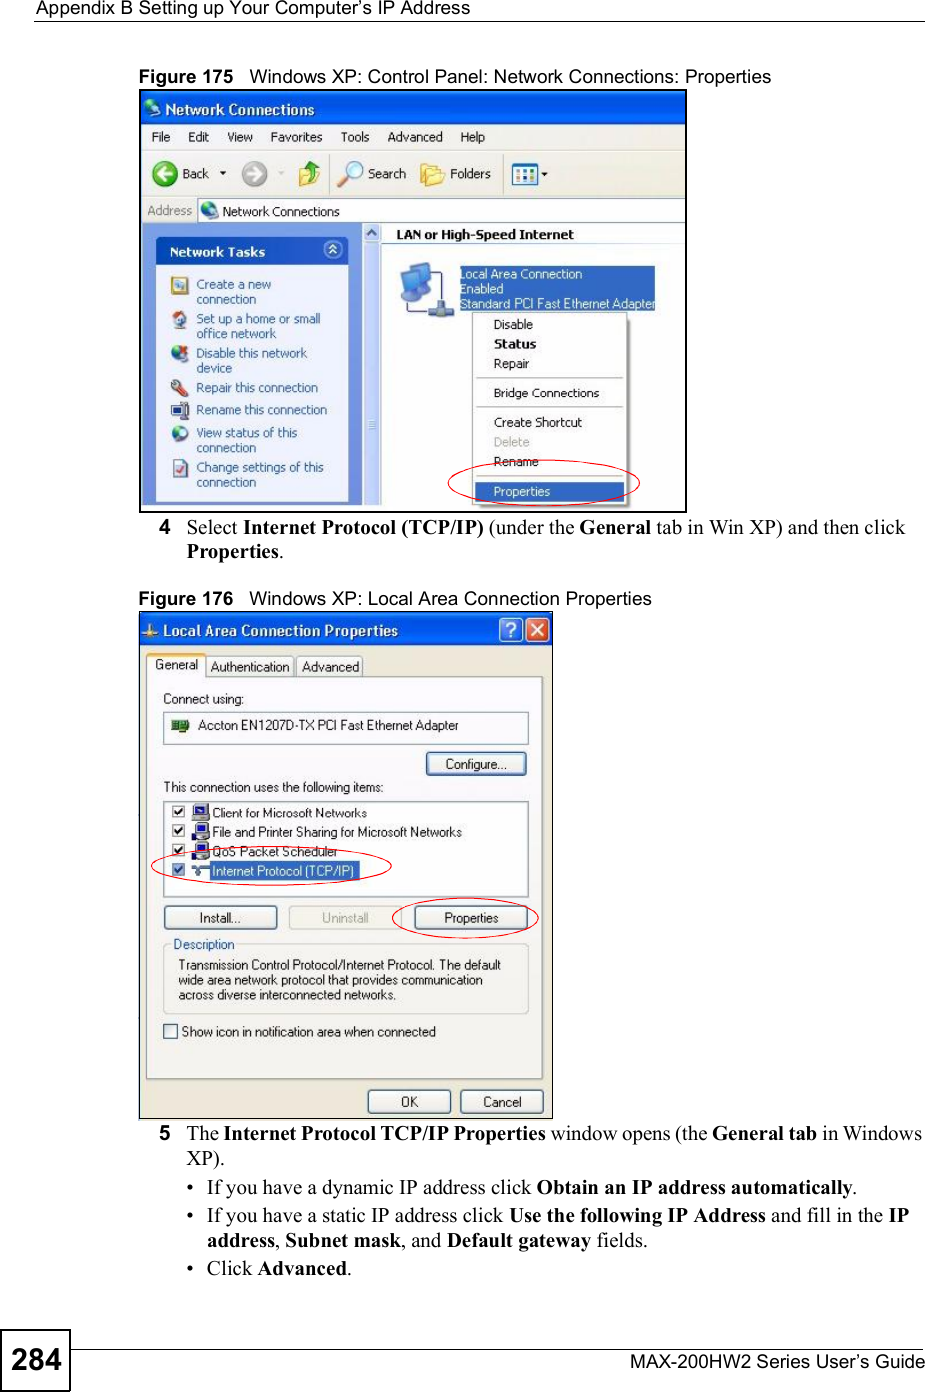 Appendix BSetting up Your Computer s IP AddressMAX-200HW2 Series User s Guide284Figure 175   Windows XP: Control Panel: Network Connections: Properties4Select Internet Protocol (TCP/IP) (under the General tab in Win XP) and then click Properties.Figure 176   Windows XP: Local Area Connection Properties5The Internet Protocol TCP/IP Properties window opens (the General tab in Windows XP). If you have a dynamic IP address click Obtain an IP address automatically. If you have a static IP address click Use the following IP Address and fill in the IPaddress,Subnet mask, and Default gateway fields.  Click Advanced.